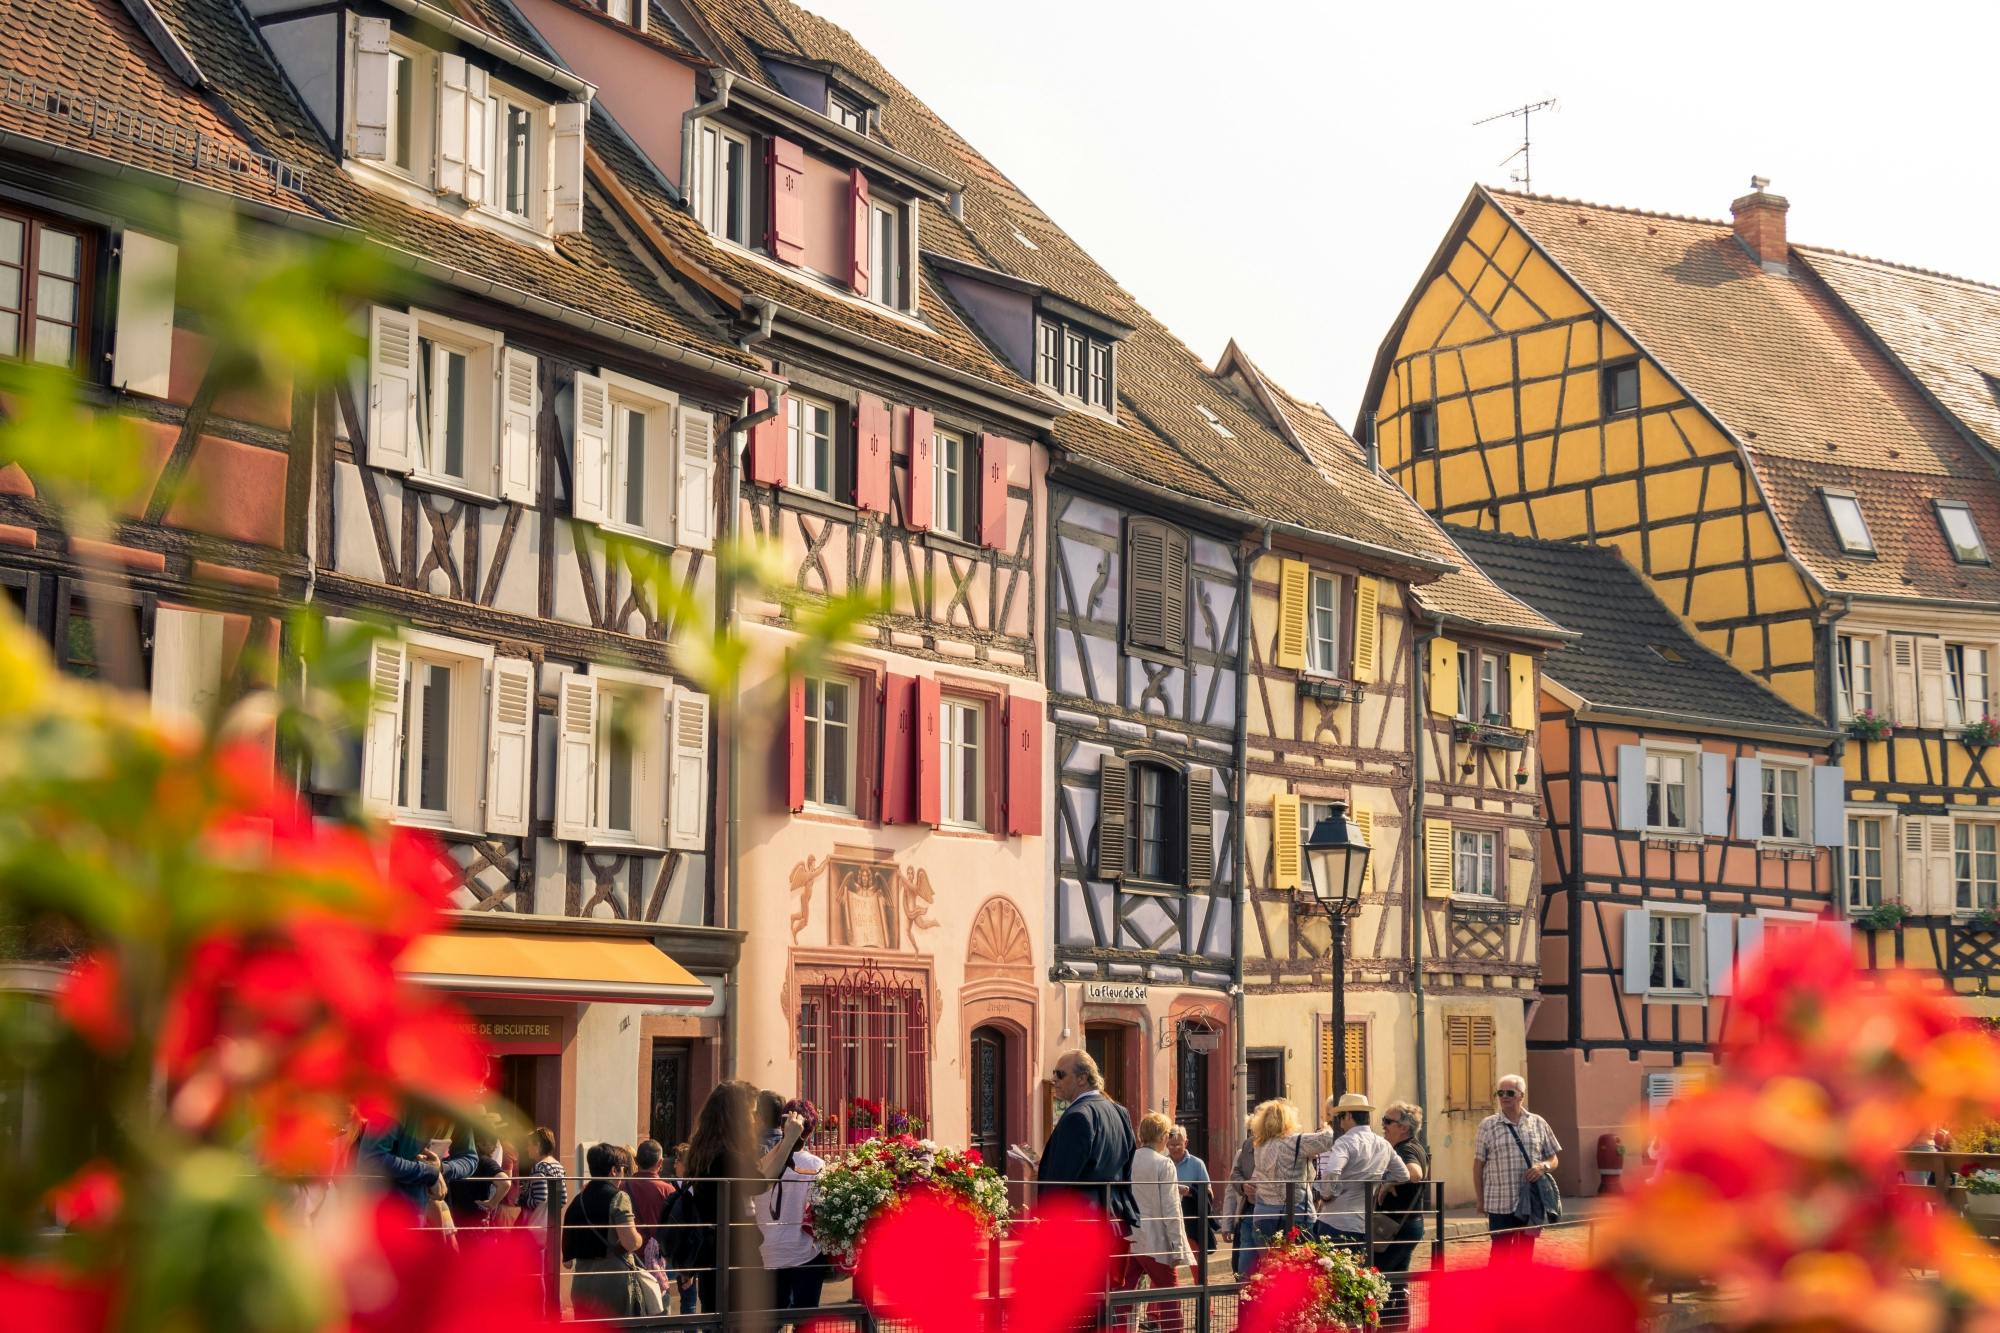 Instagrammable spots of Colmar walking tour with a Local Musement